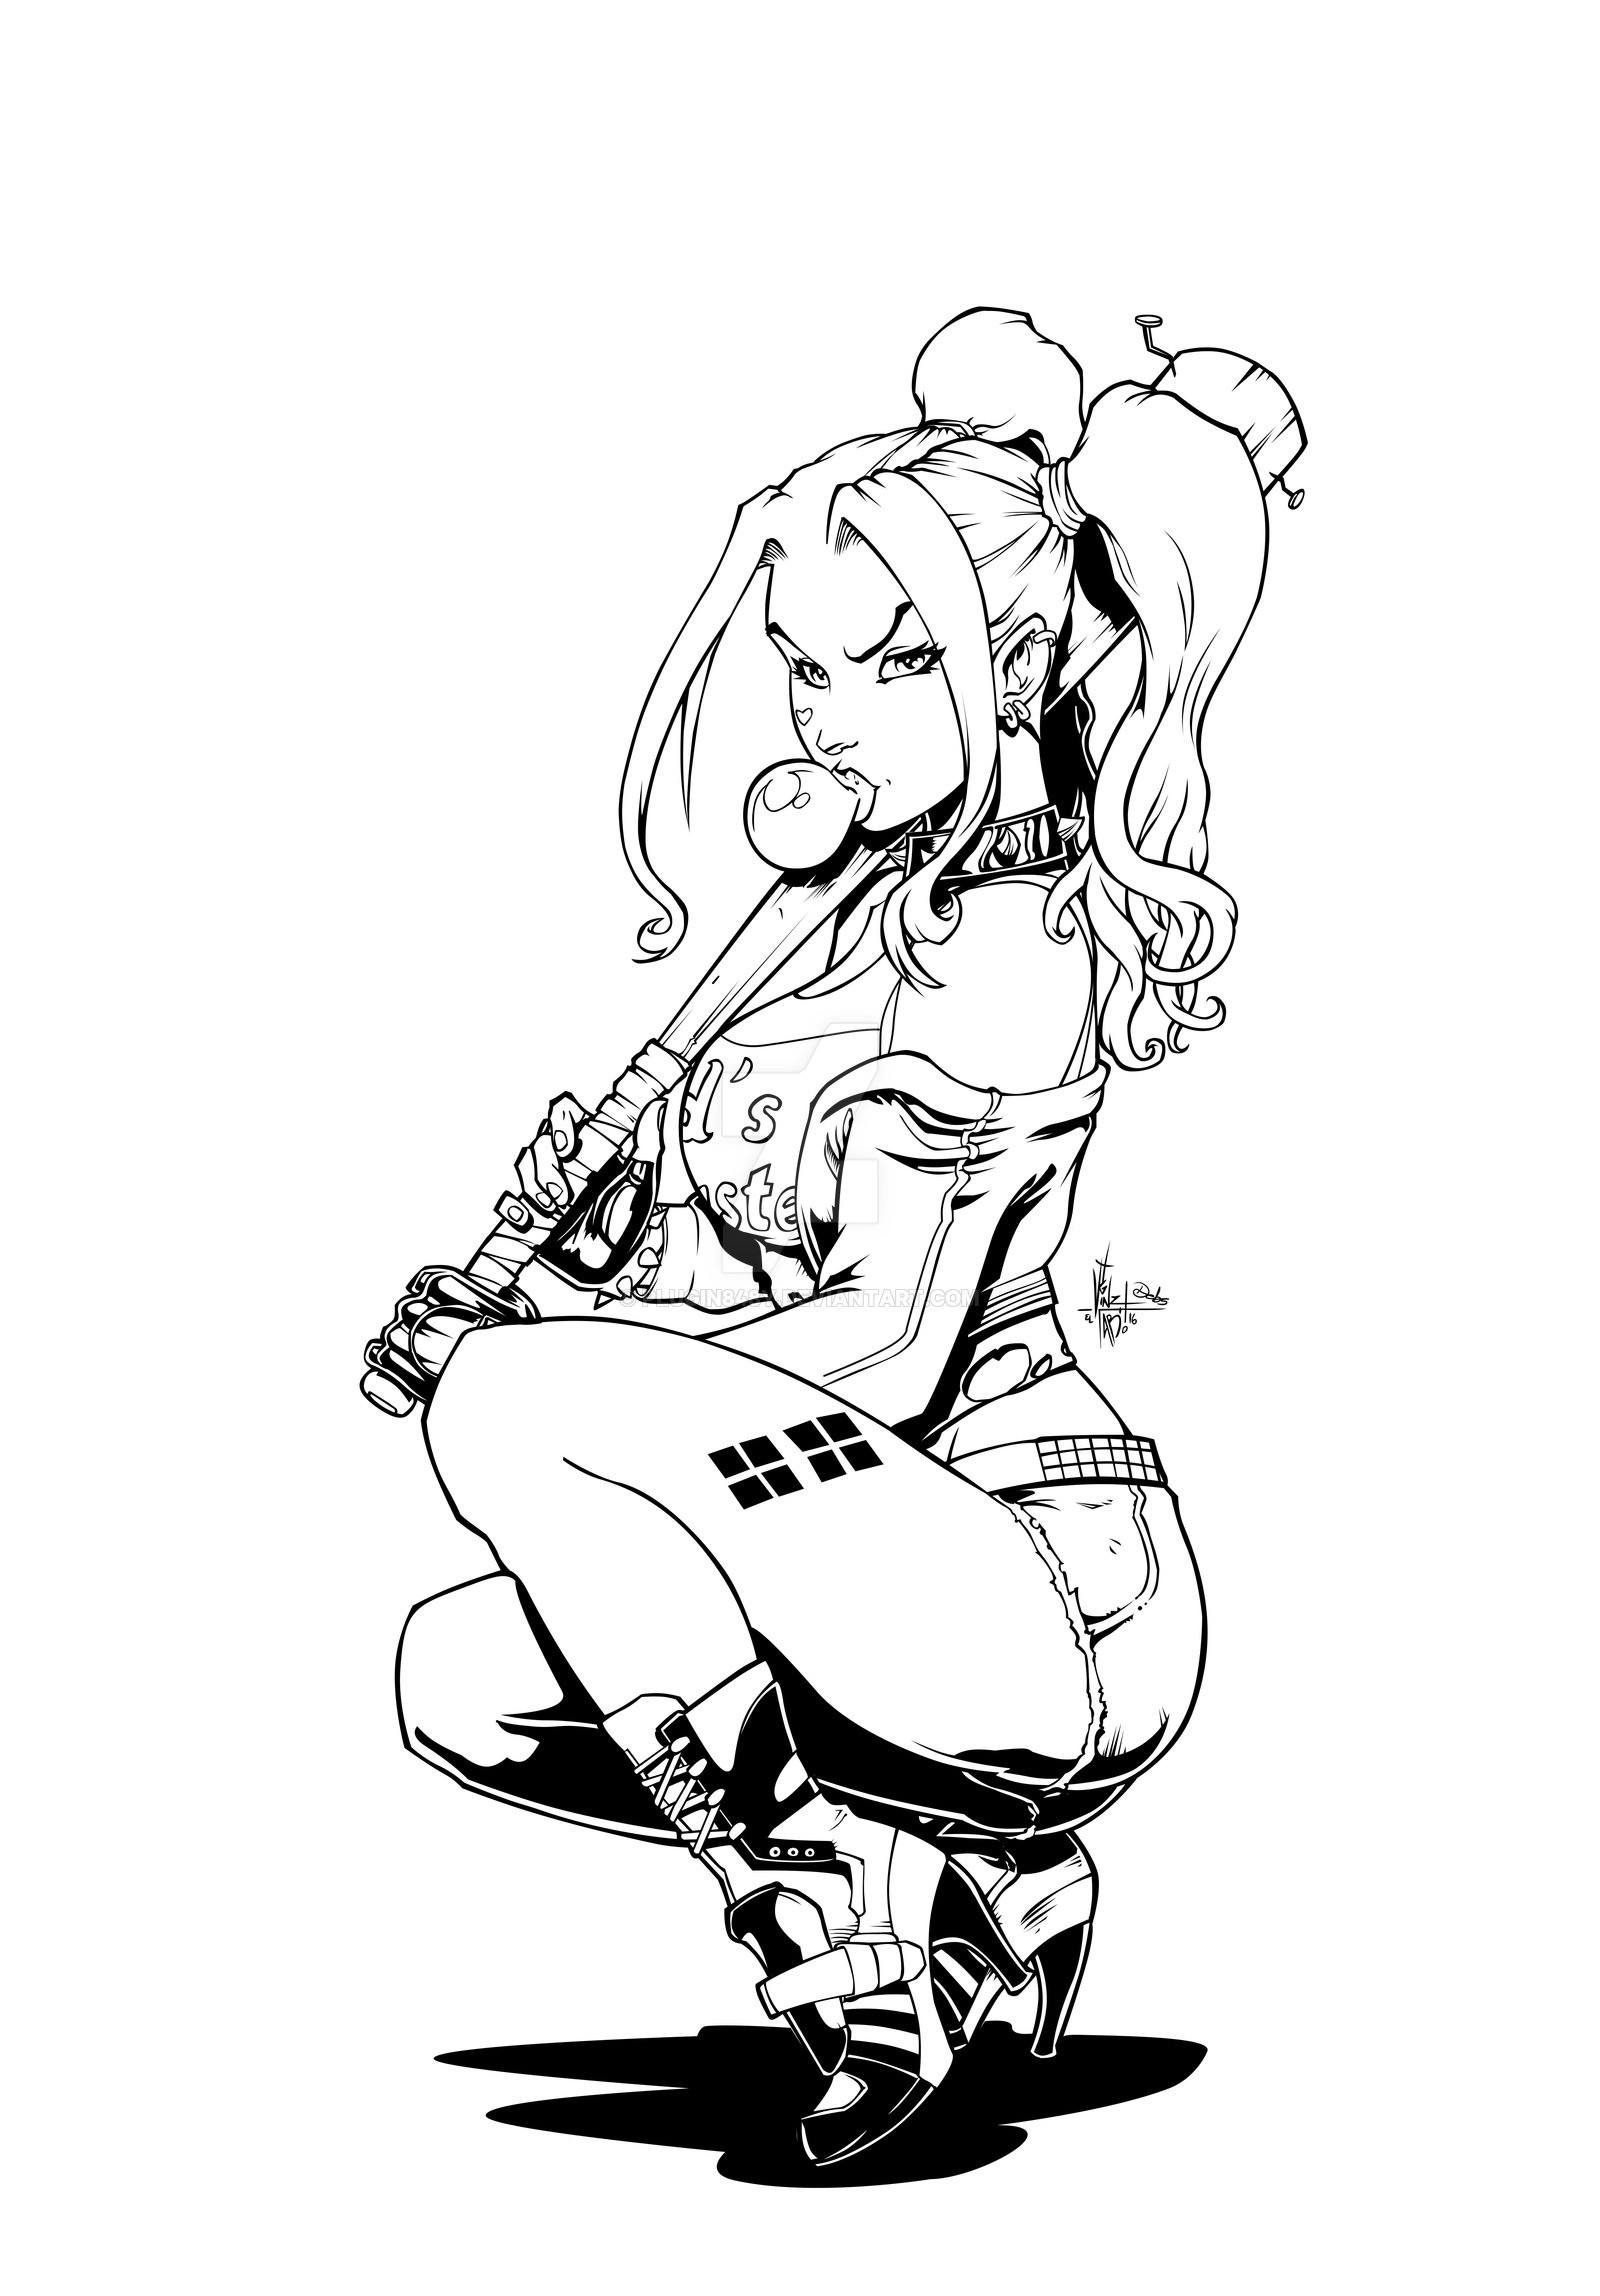 Harley Quinn Coloring Sheets For Girls
 Suicide Squad Coloring Pages Best Coloring Pages For Kids